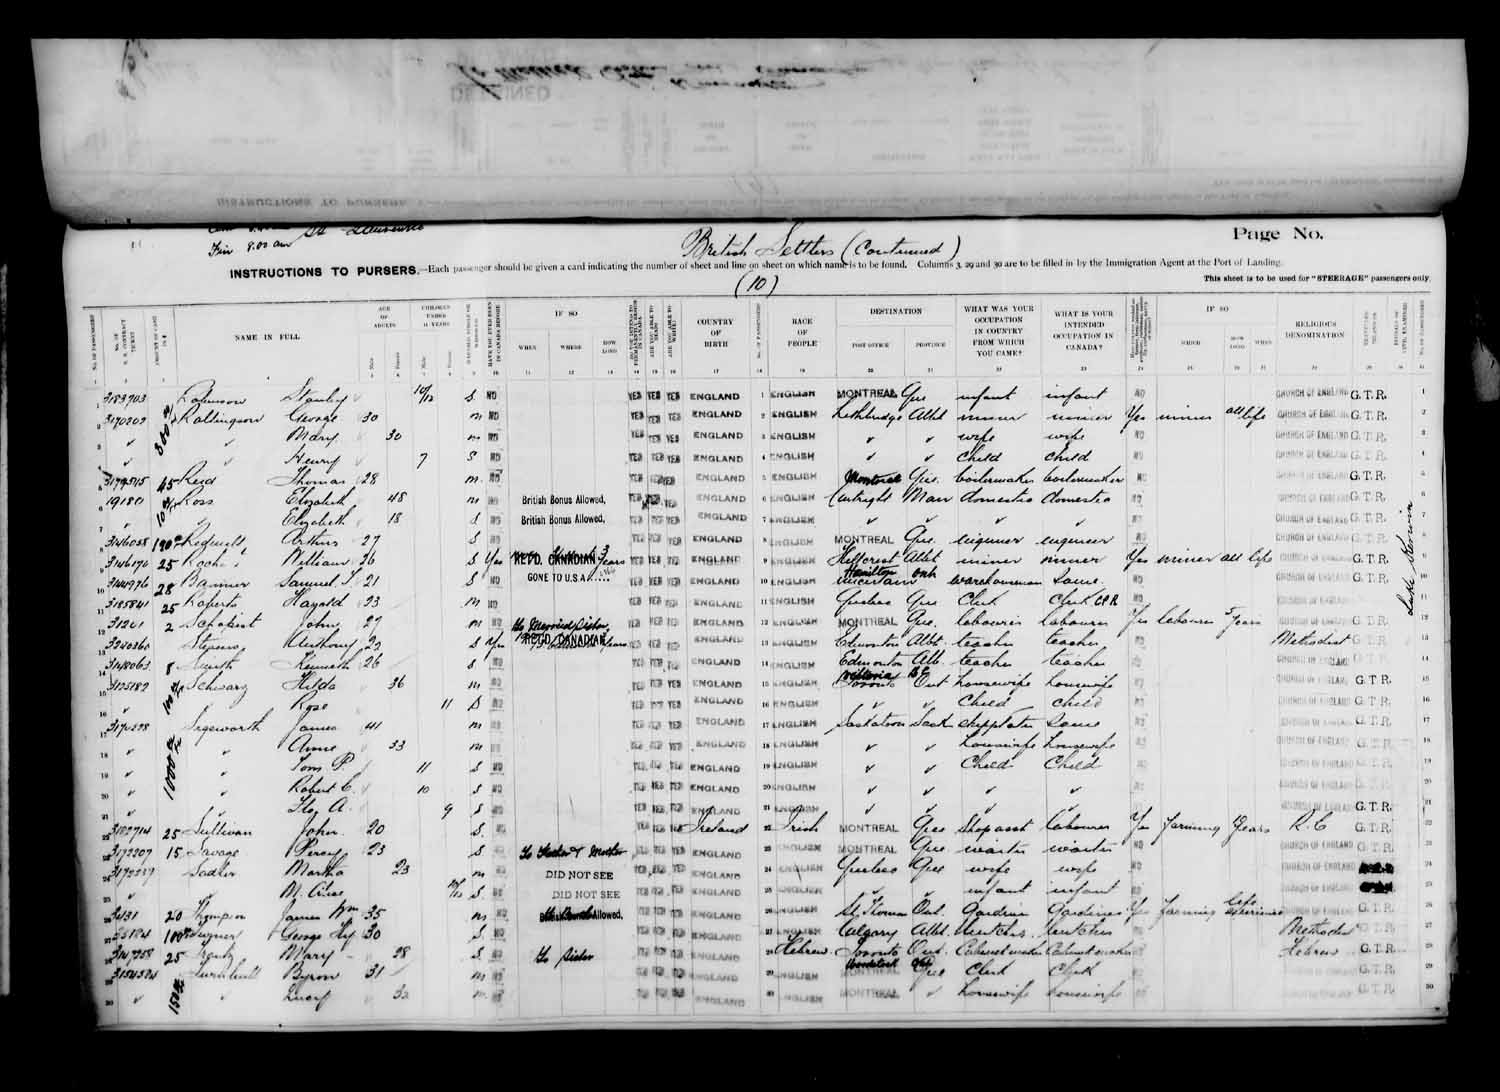 Digitized page of Quebec Passenger Lists for Image No.: e003594330